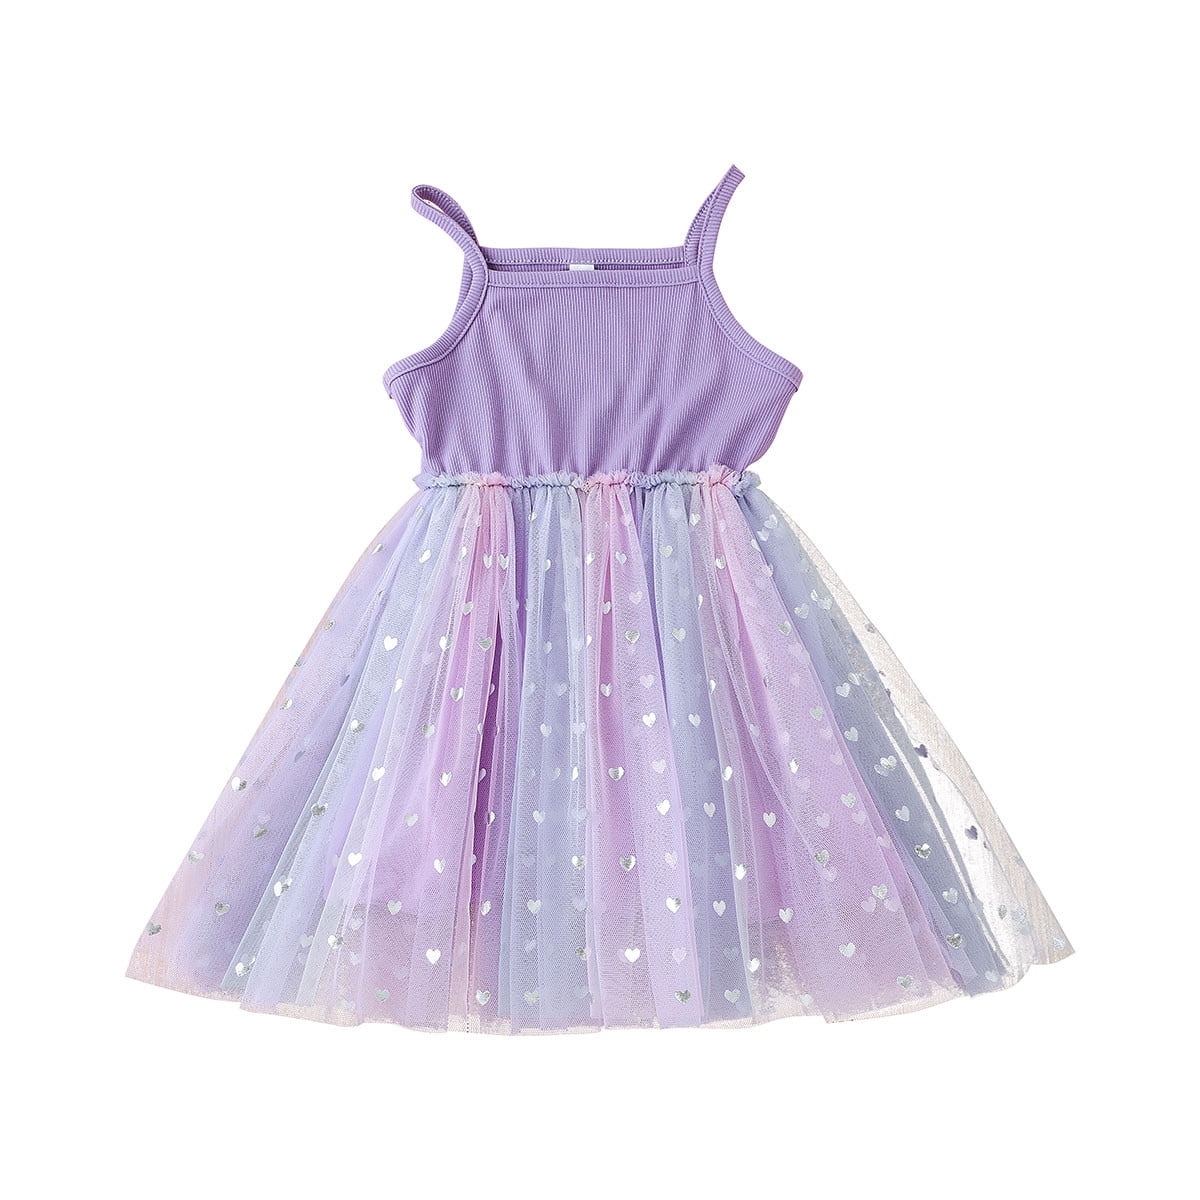 Girls' Dresses Sleeveless Strap Tulle Patchwork Summer Princess Casual ...